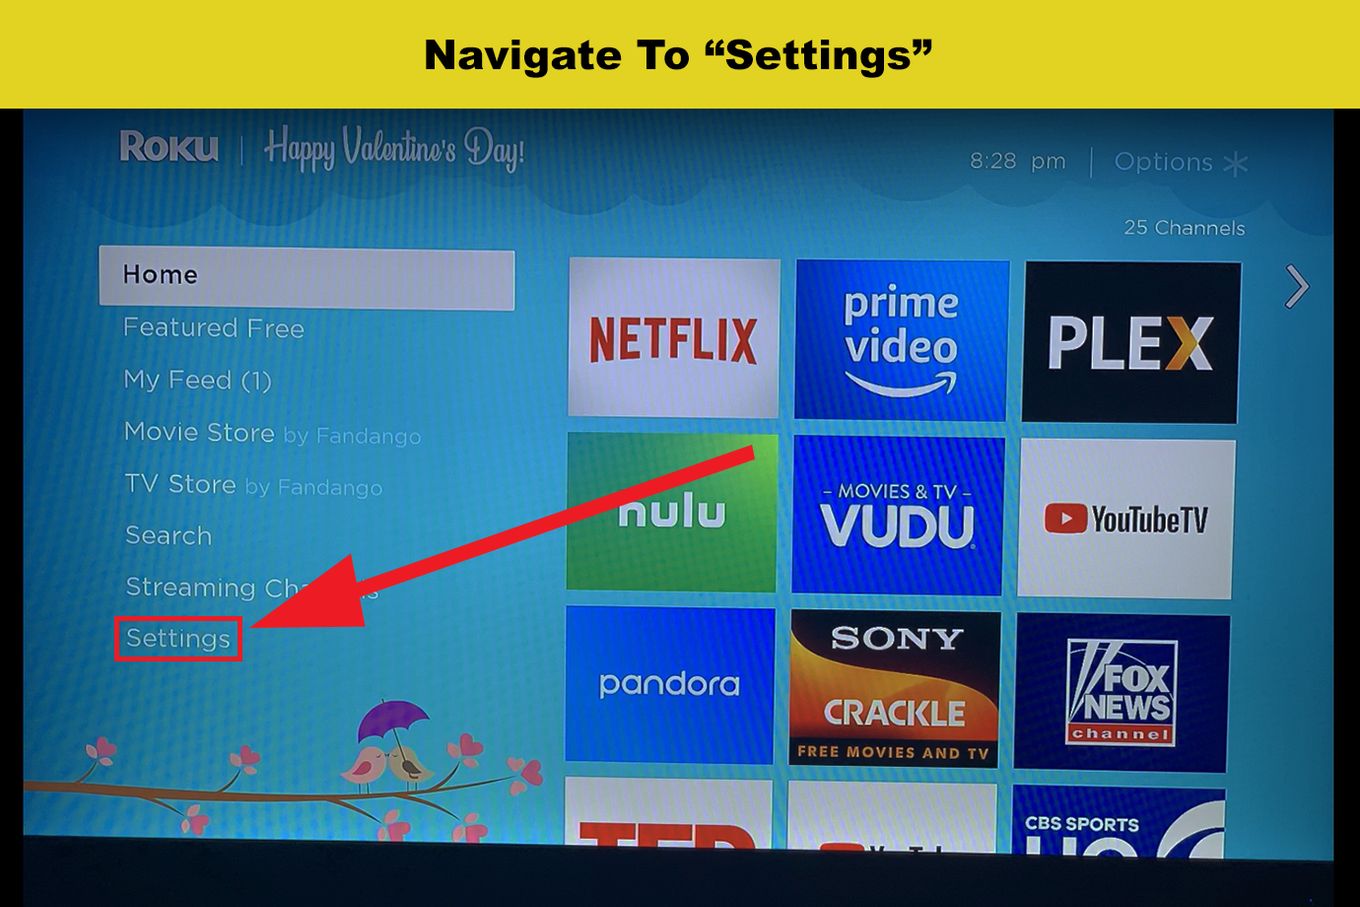 From your home screen, navigate to settings